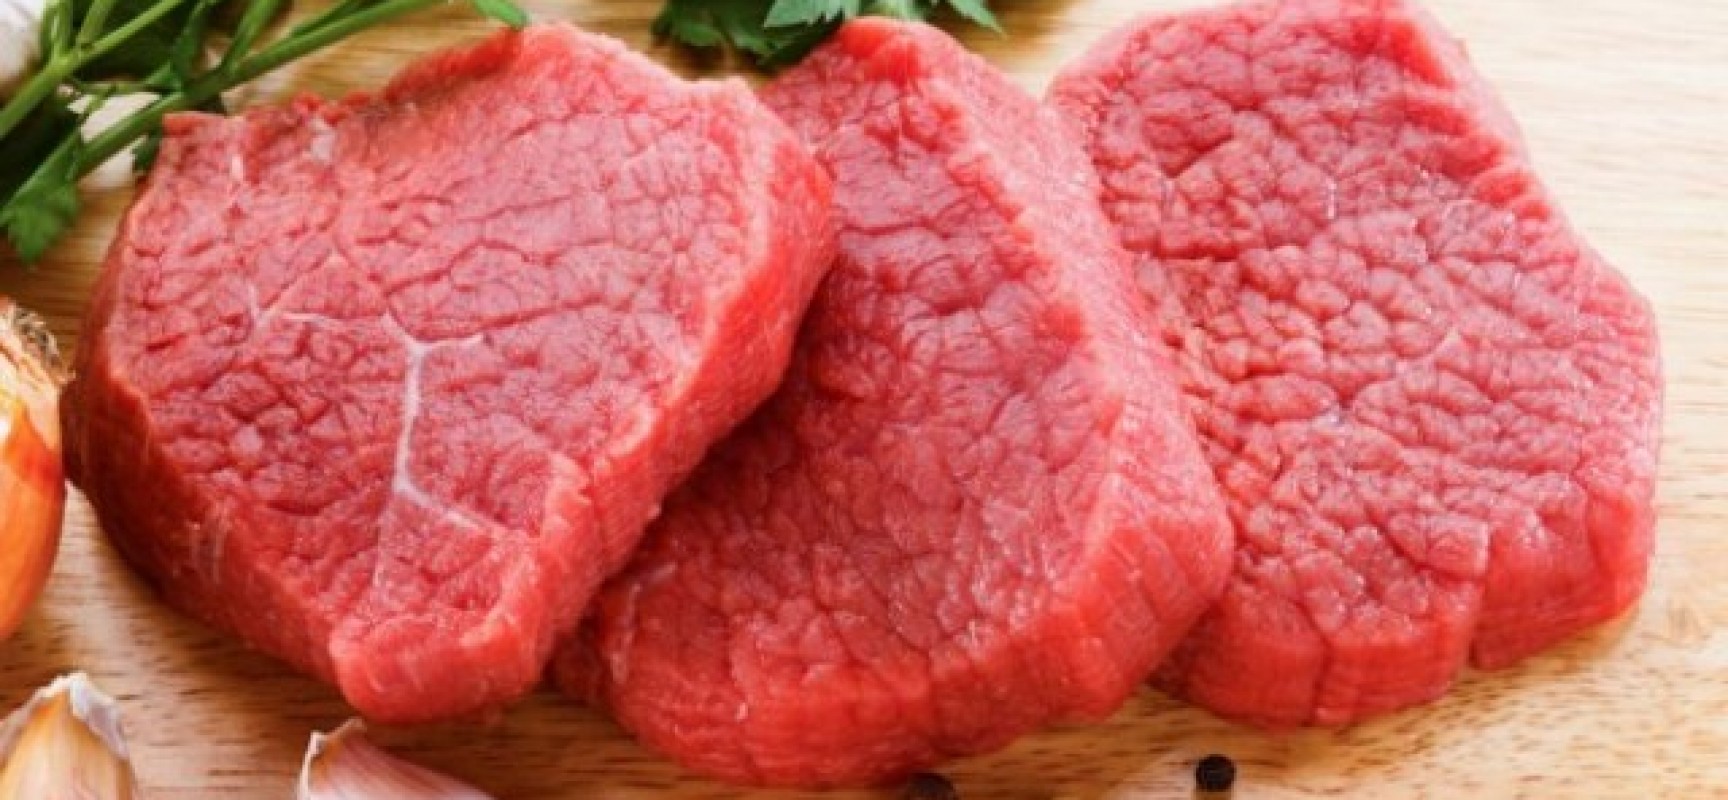 Red Meat: Is it really bad for your health?